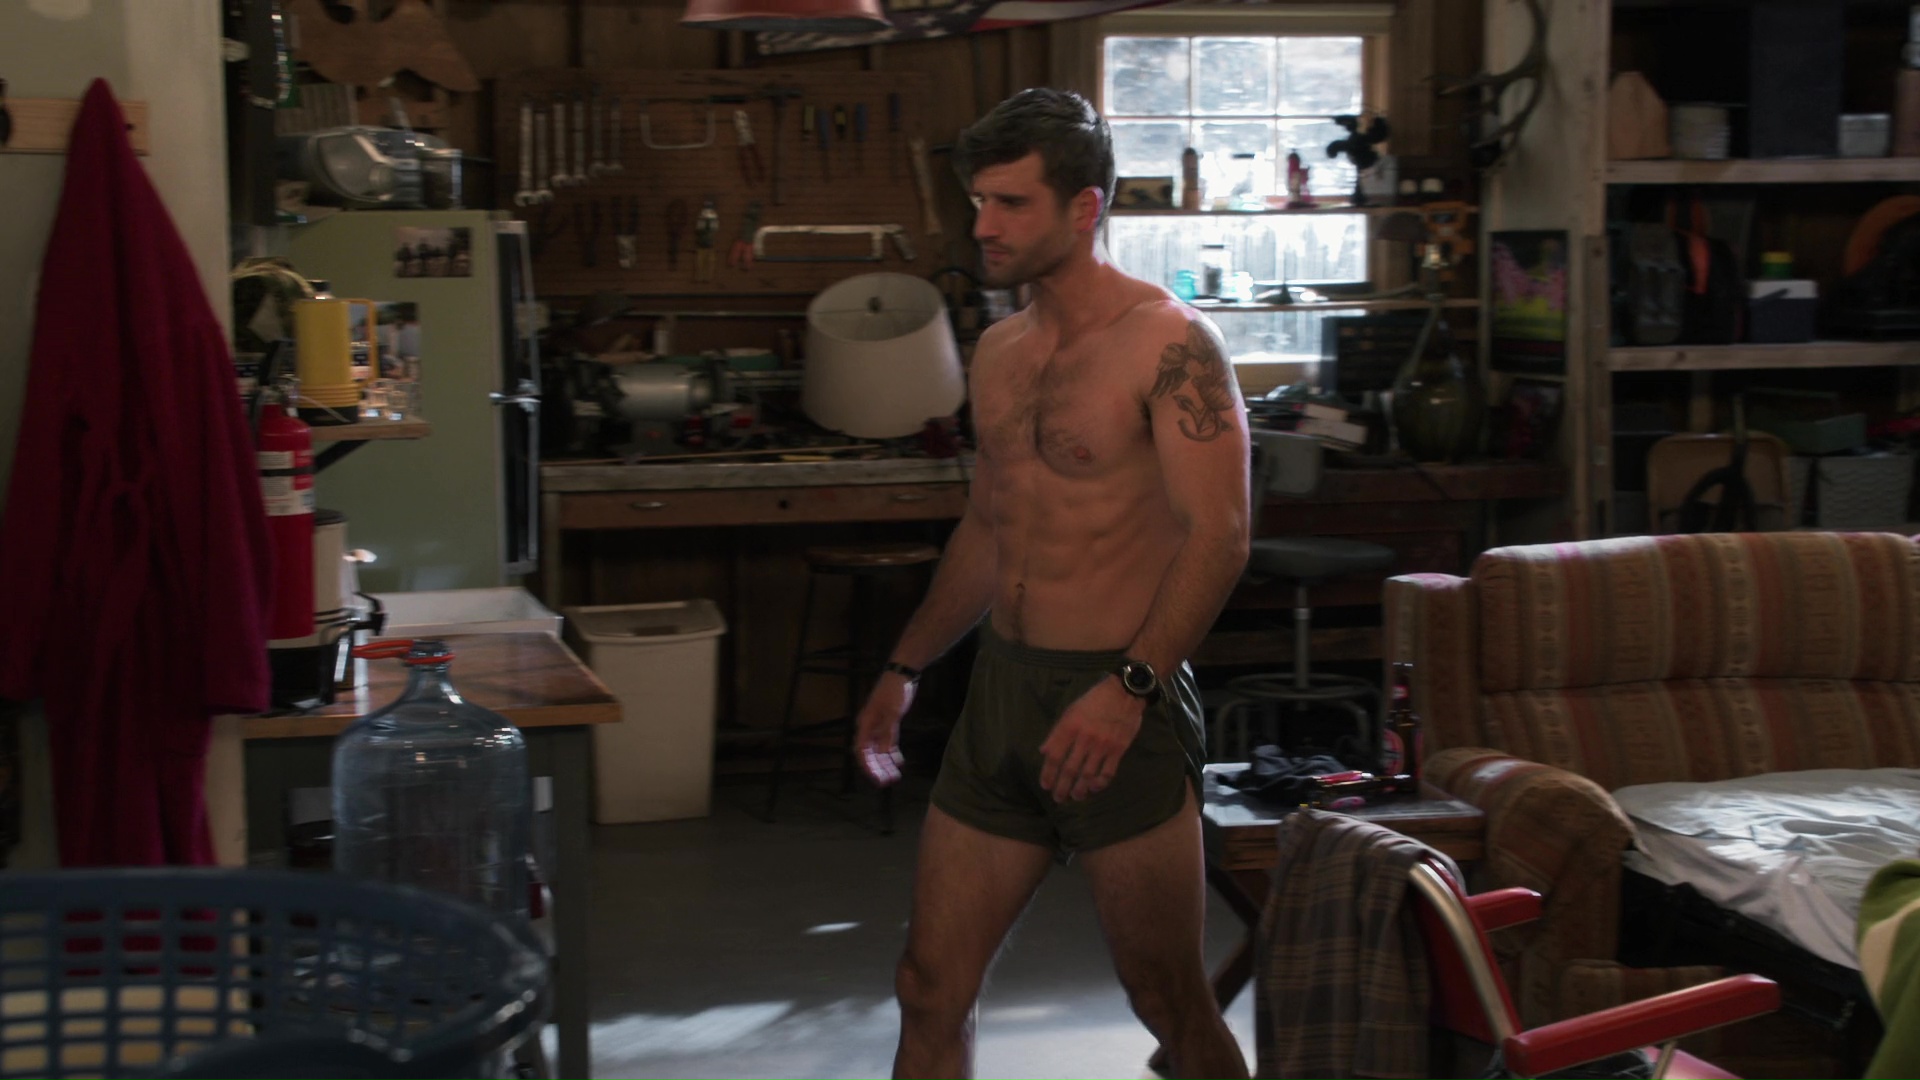 Parker young shirtless